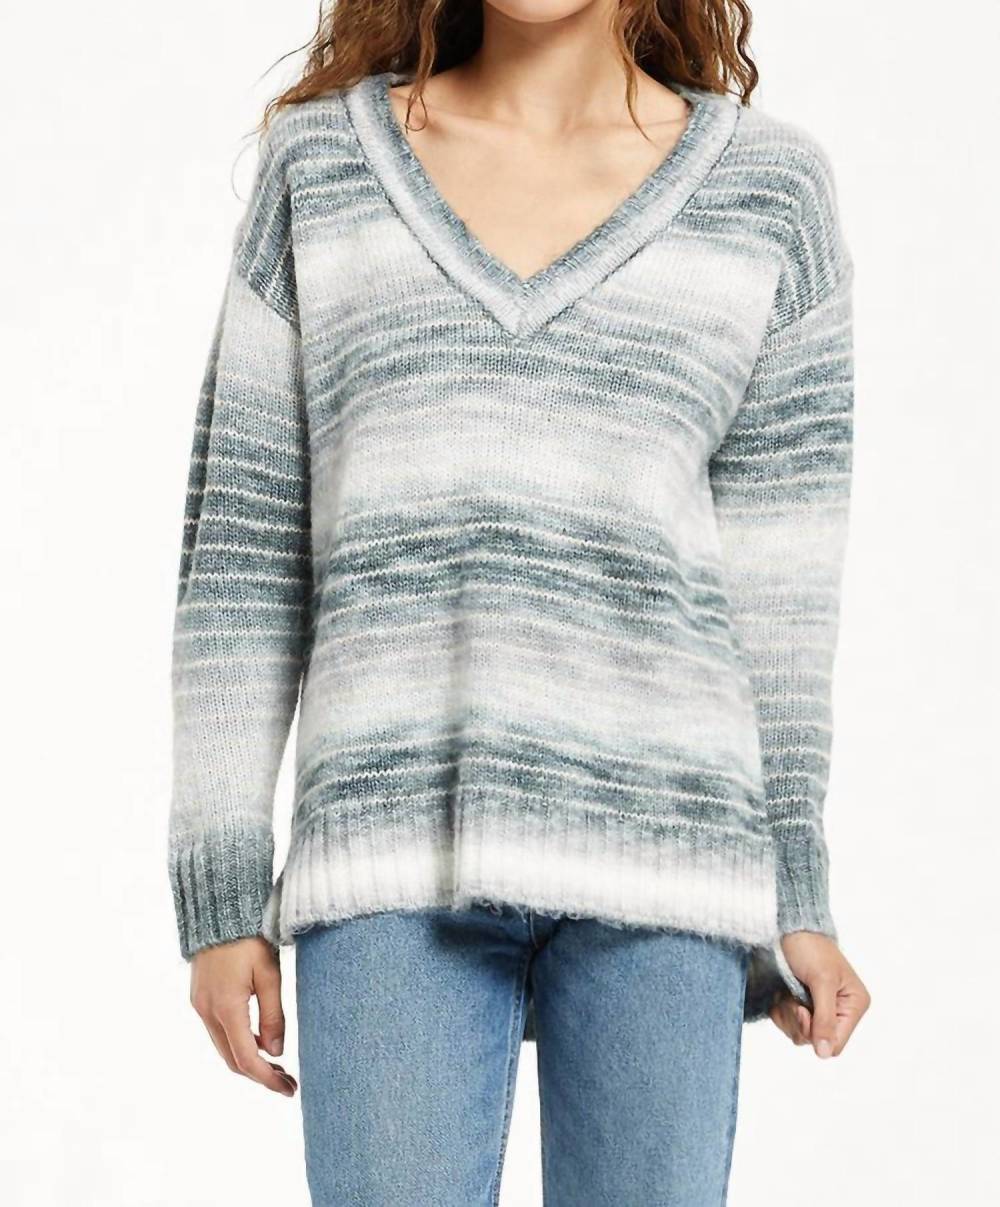 Z Supply - Parnell Petite Cable Knit Sweater